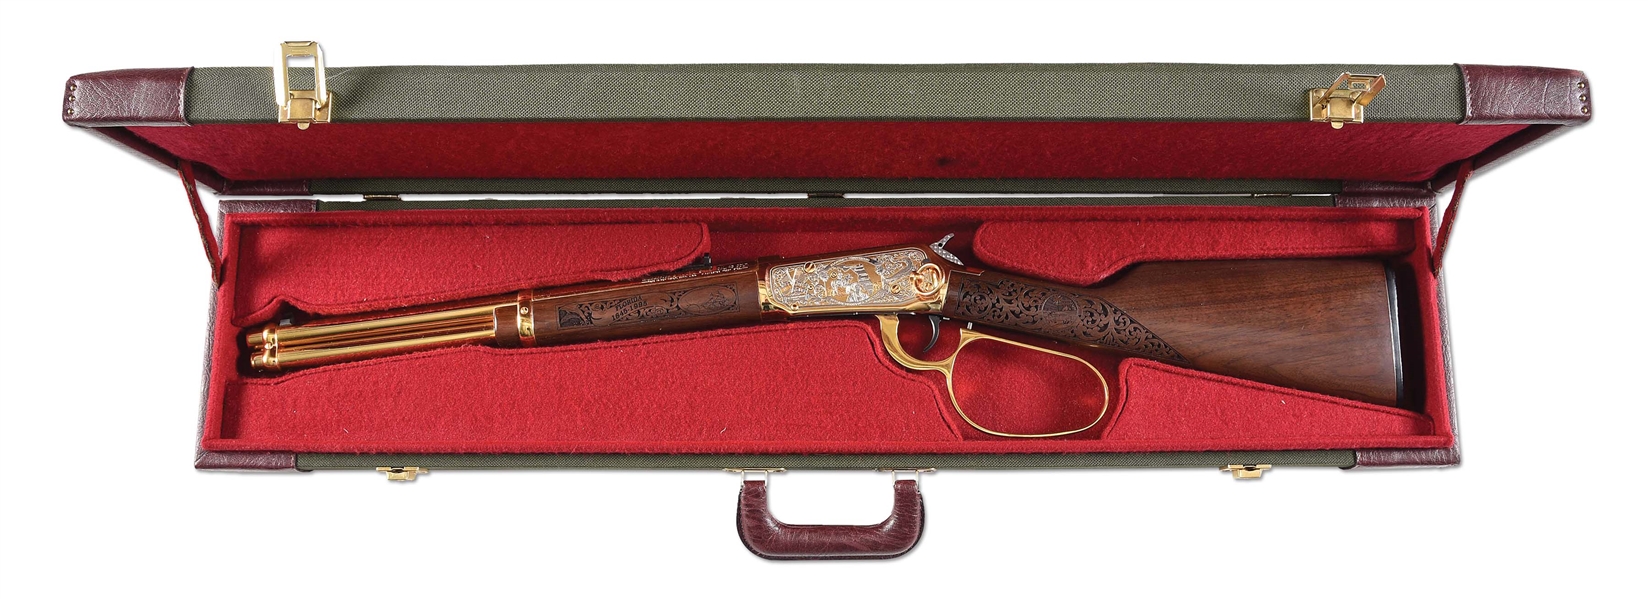 (M) WINCHESTER FLORIDA SESQUICENTENNIAL 94AE LEVER ACTION RIFLE. 